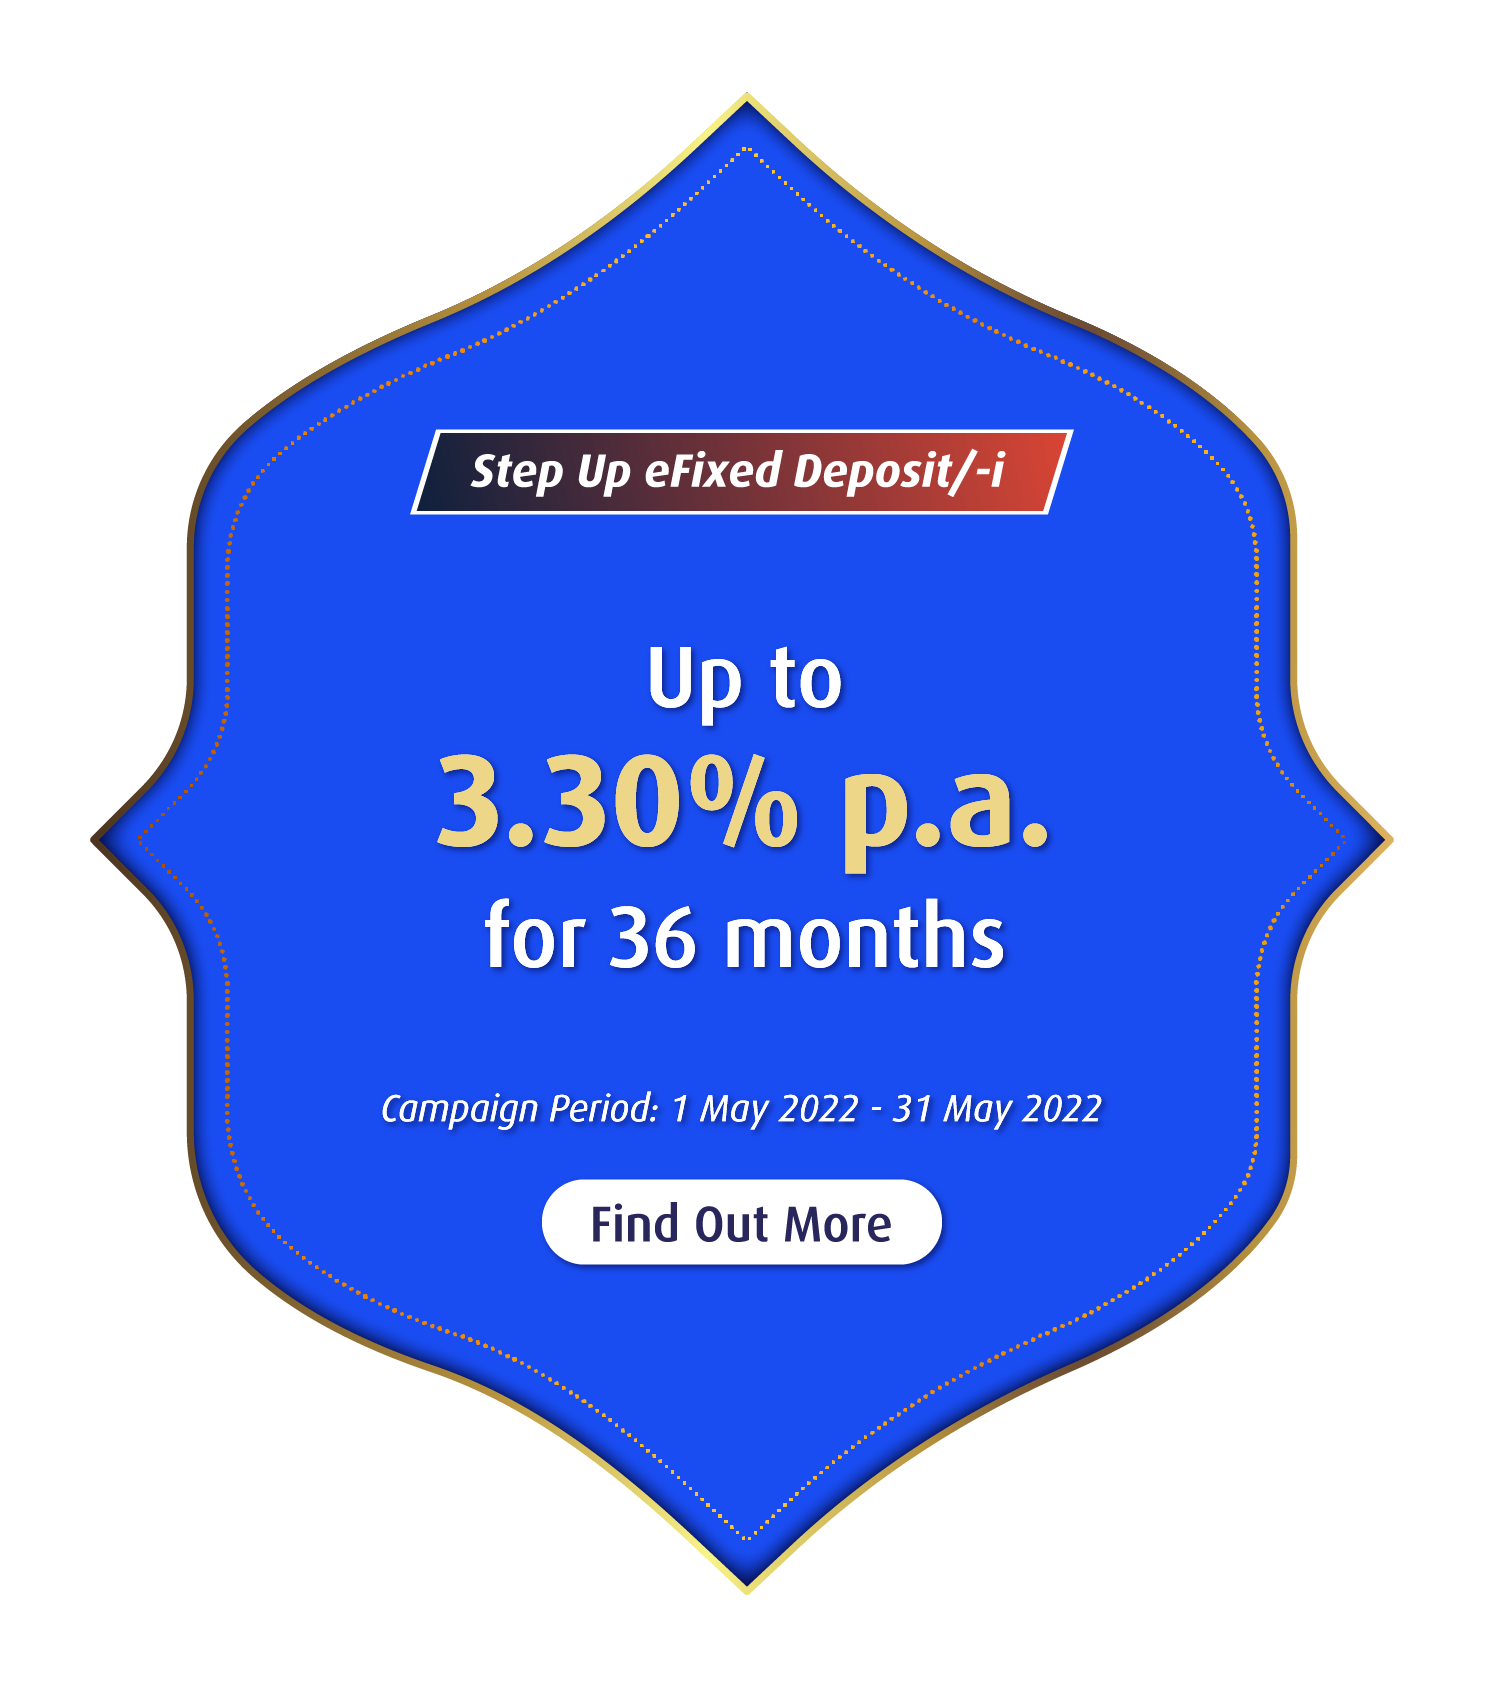 Step Up eFixed Deposit/-i Up to 3.05% p.a. for 36 months